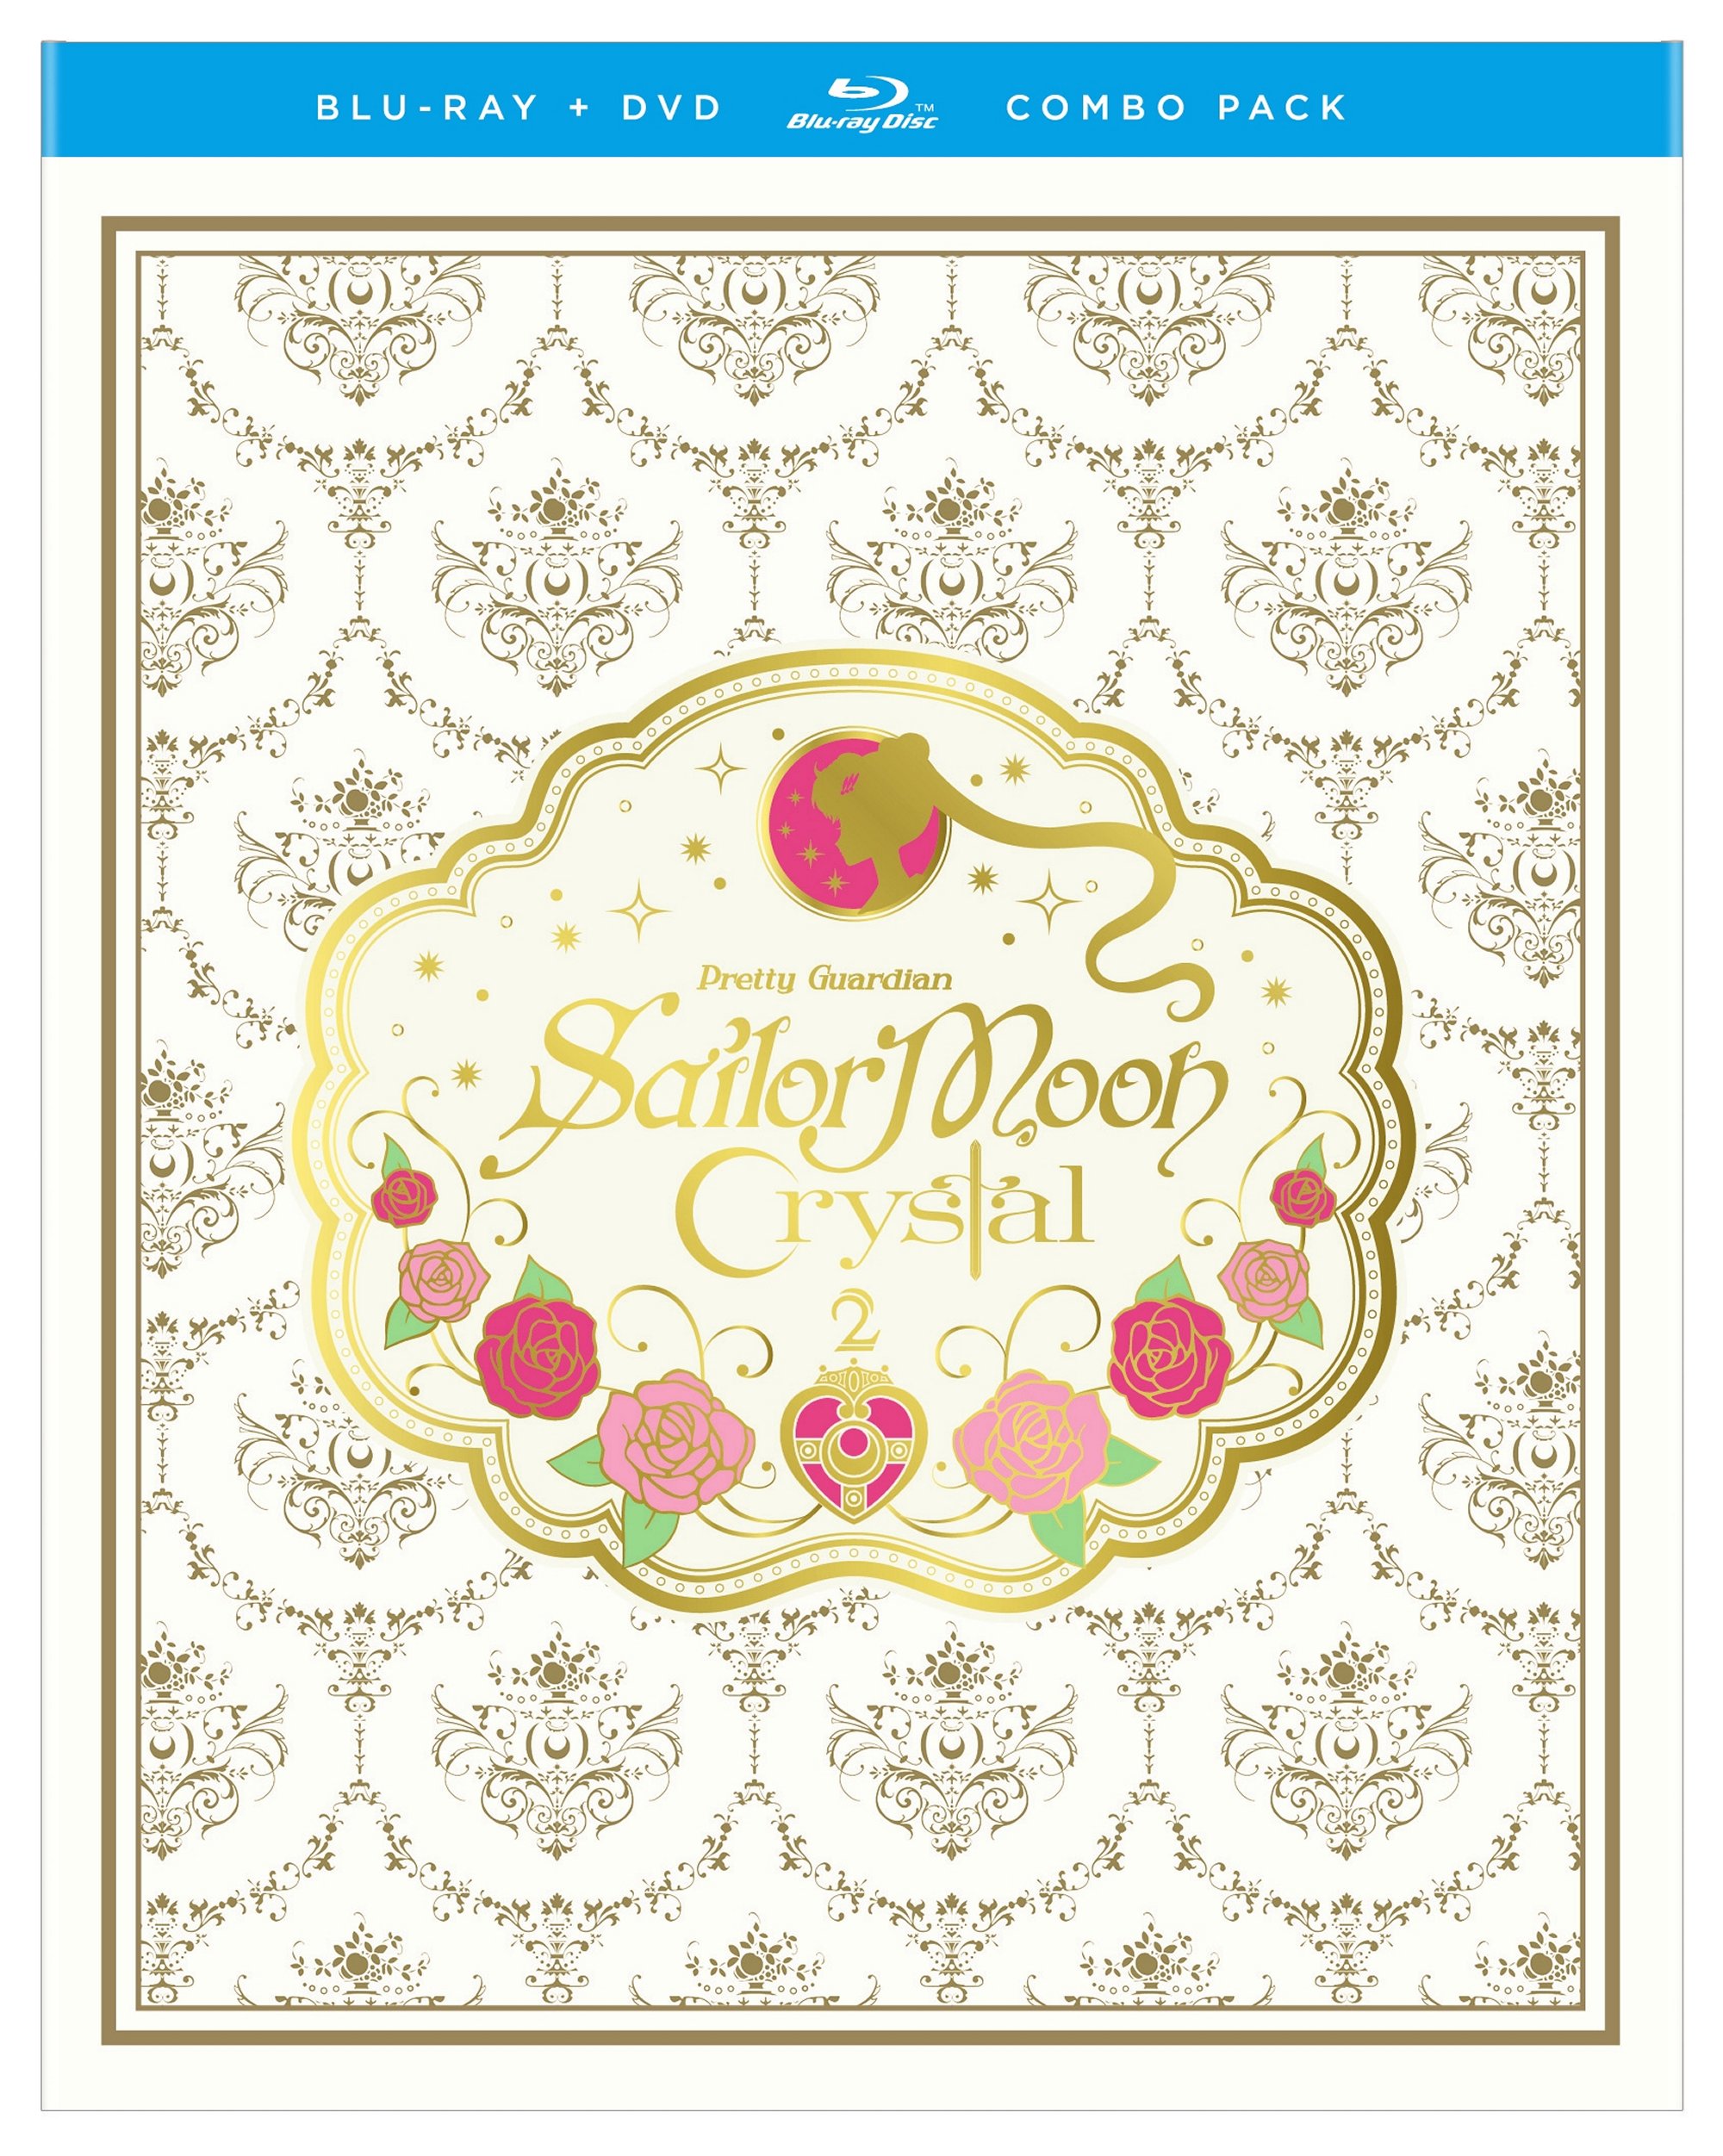 Sailor Moon Crystal Set 2 Limited Edition Blu-ray/DVD image count 0